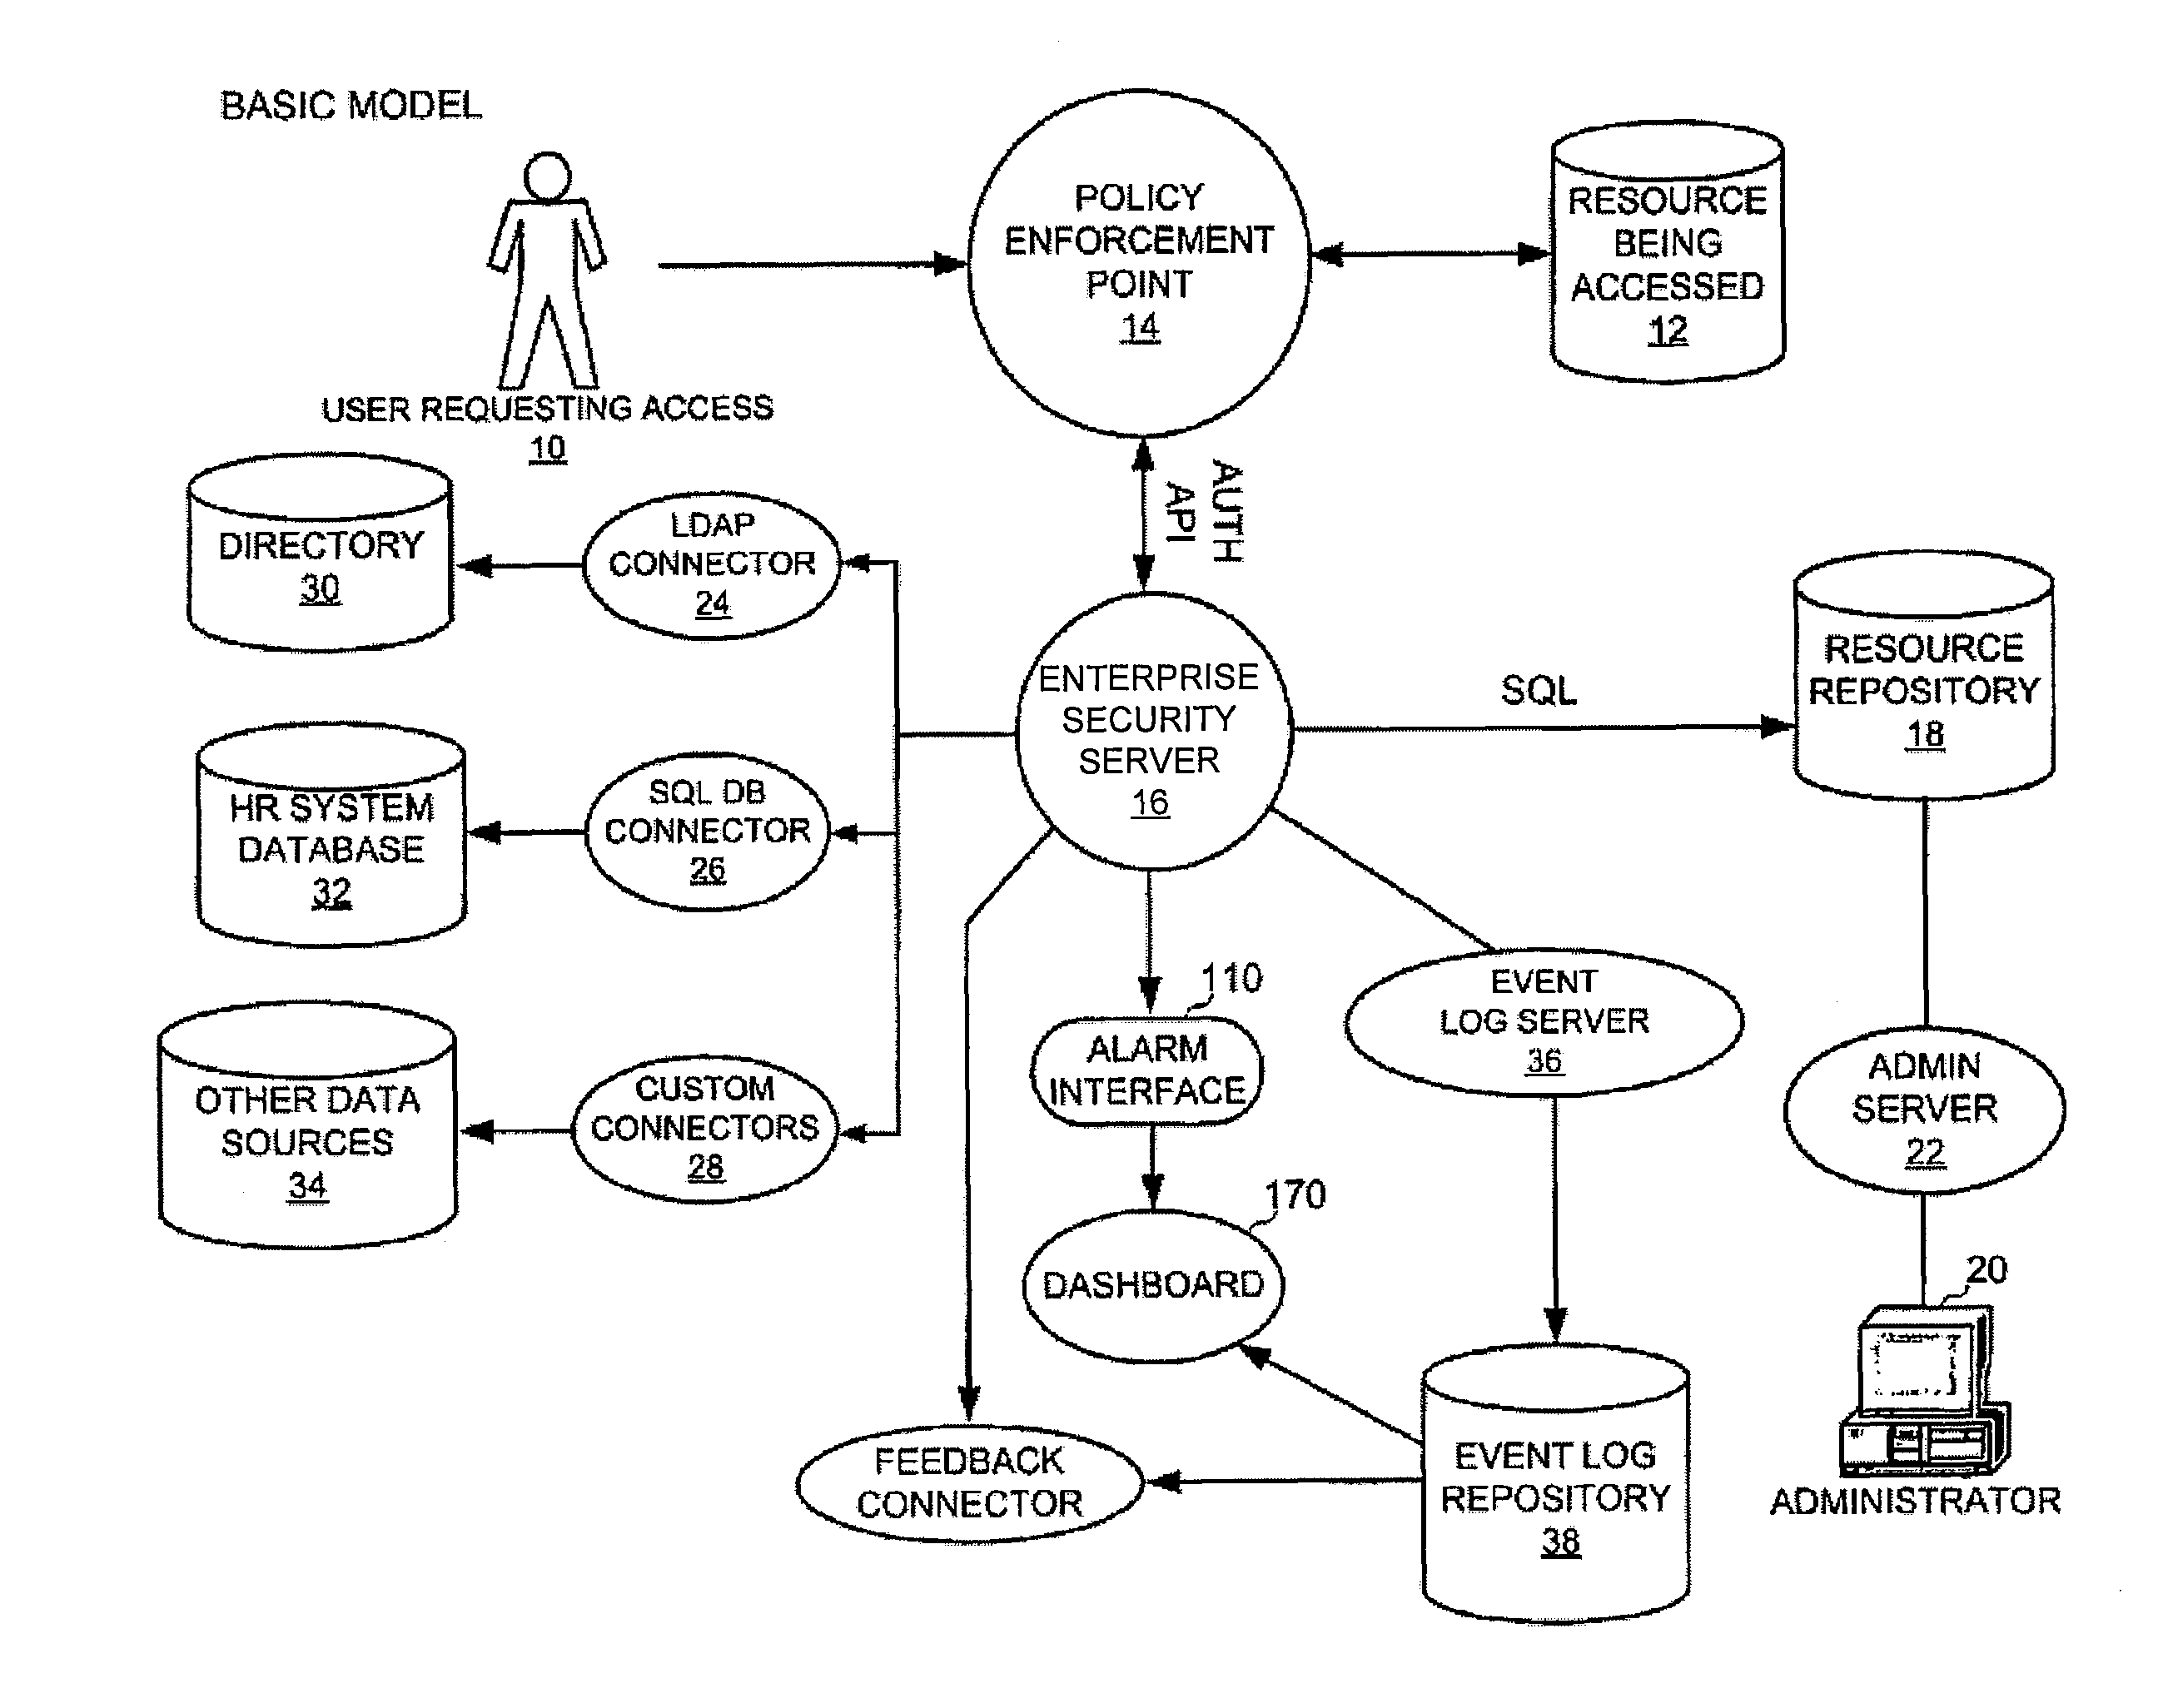 Method and system for dynamically implementing an enterprise resource policy